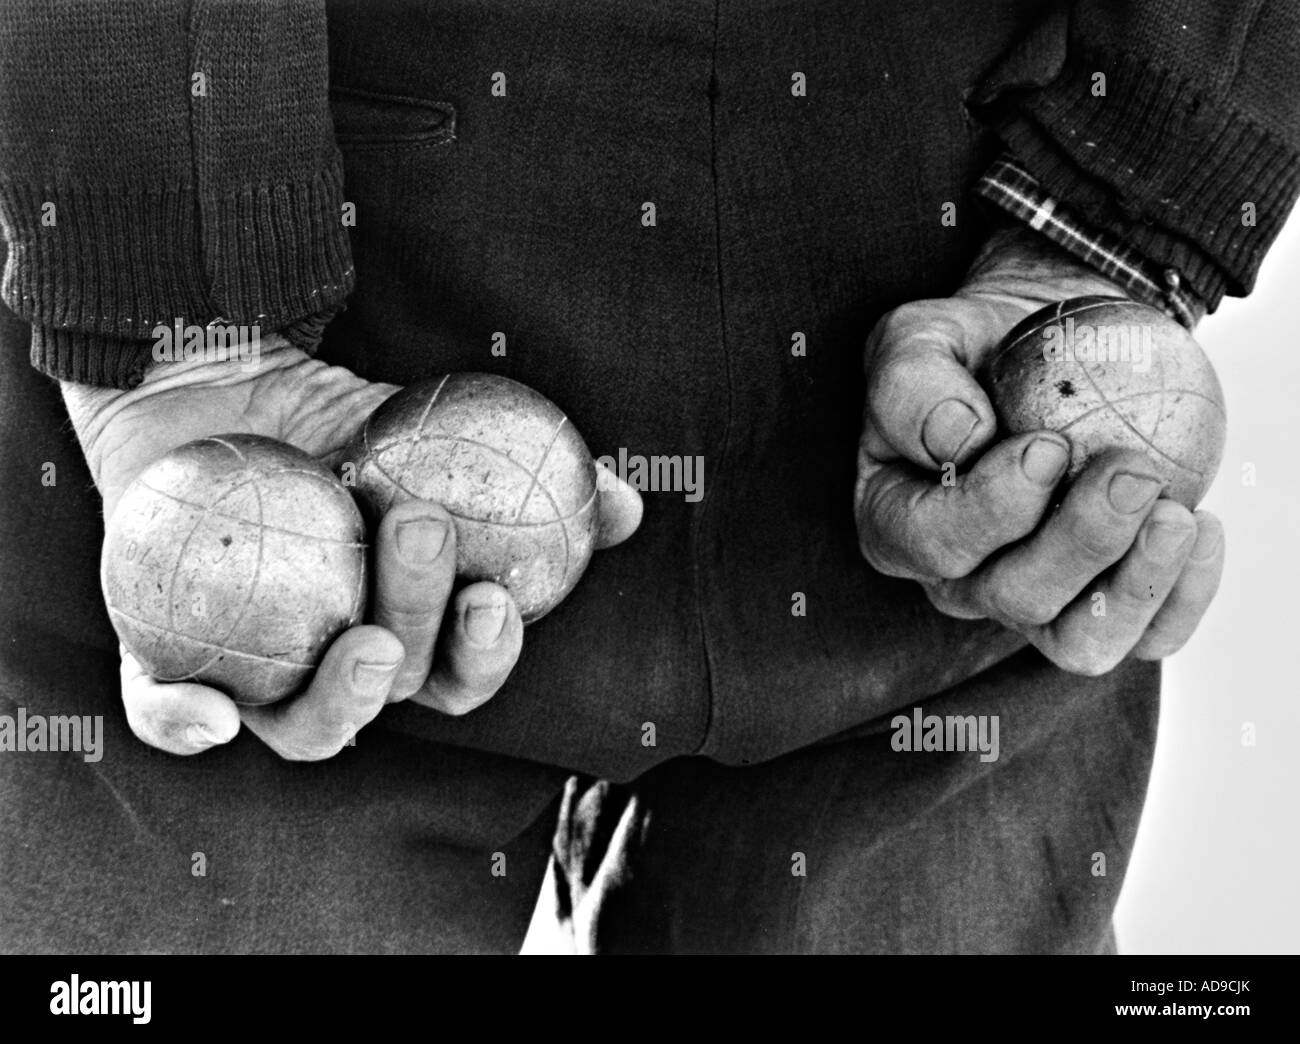 Boule balls Black and White Stock Photos & Images - Alamy